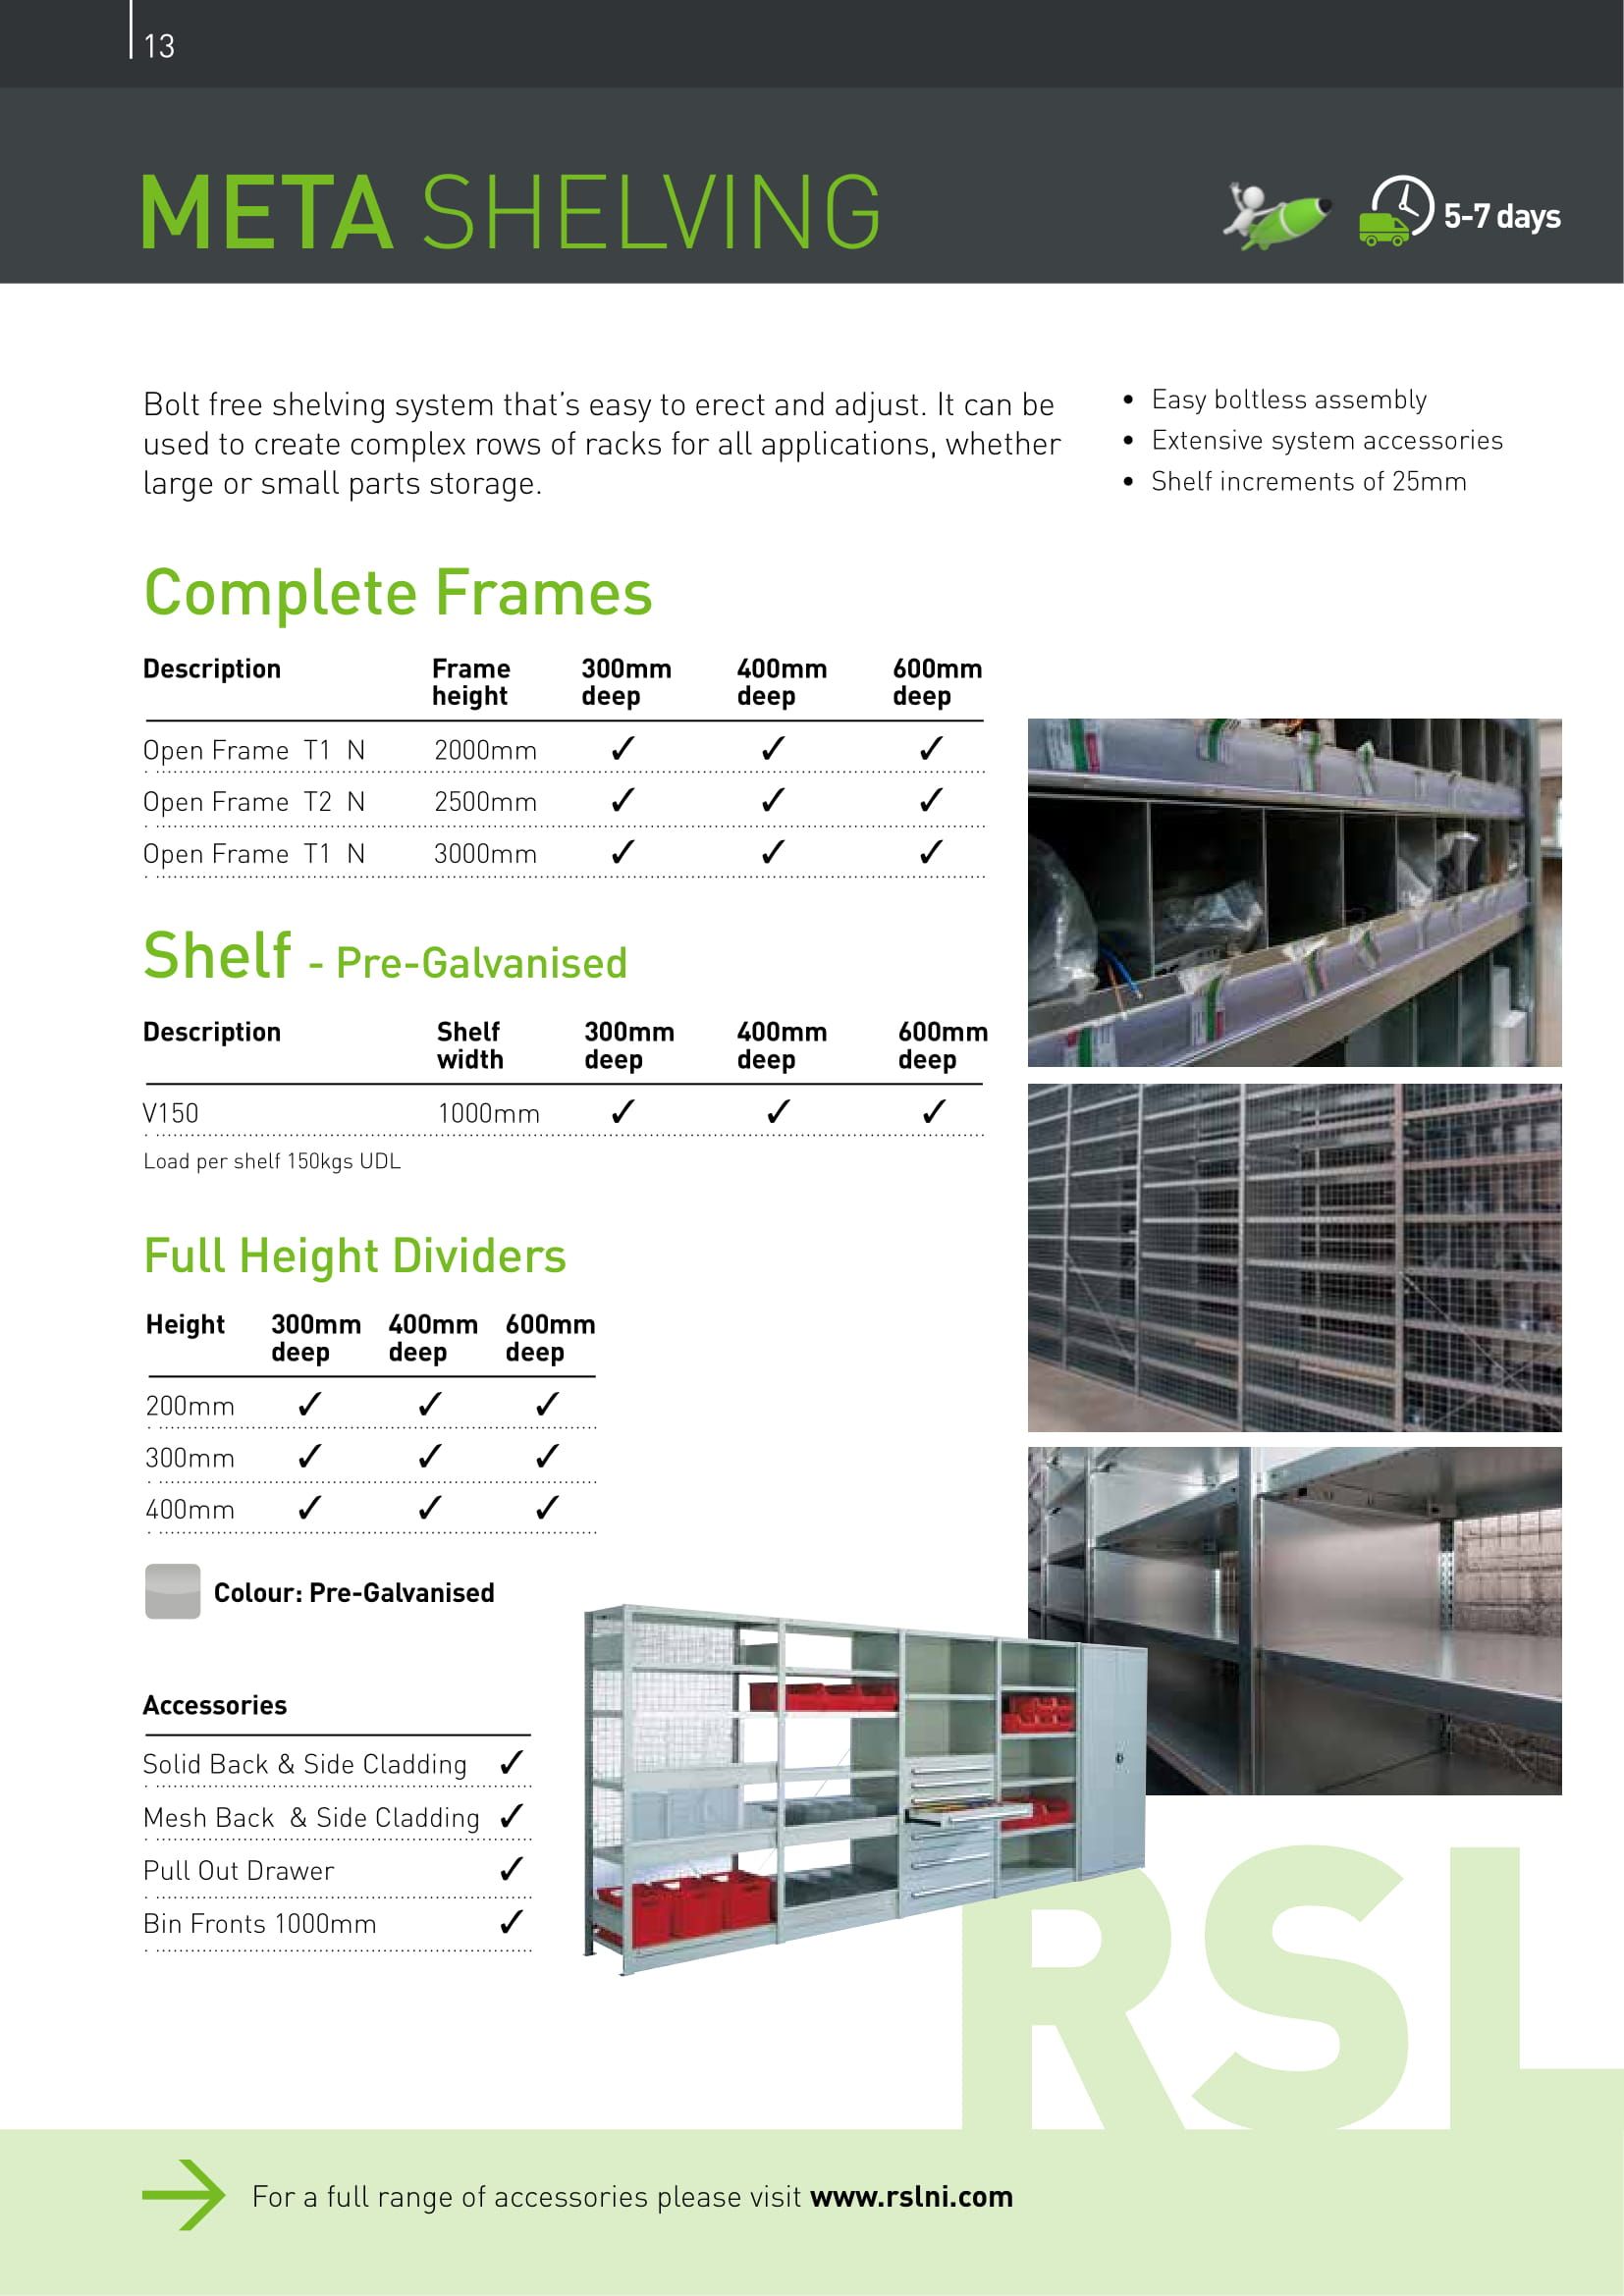 Meta Shelving brochure page featuring frames, shelves and dividers